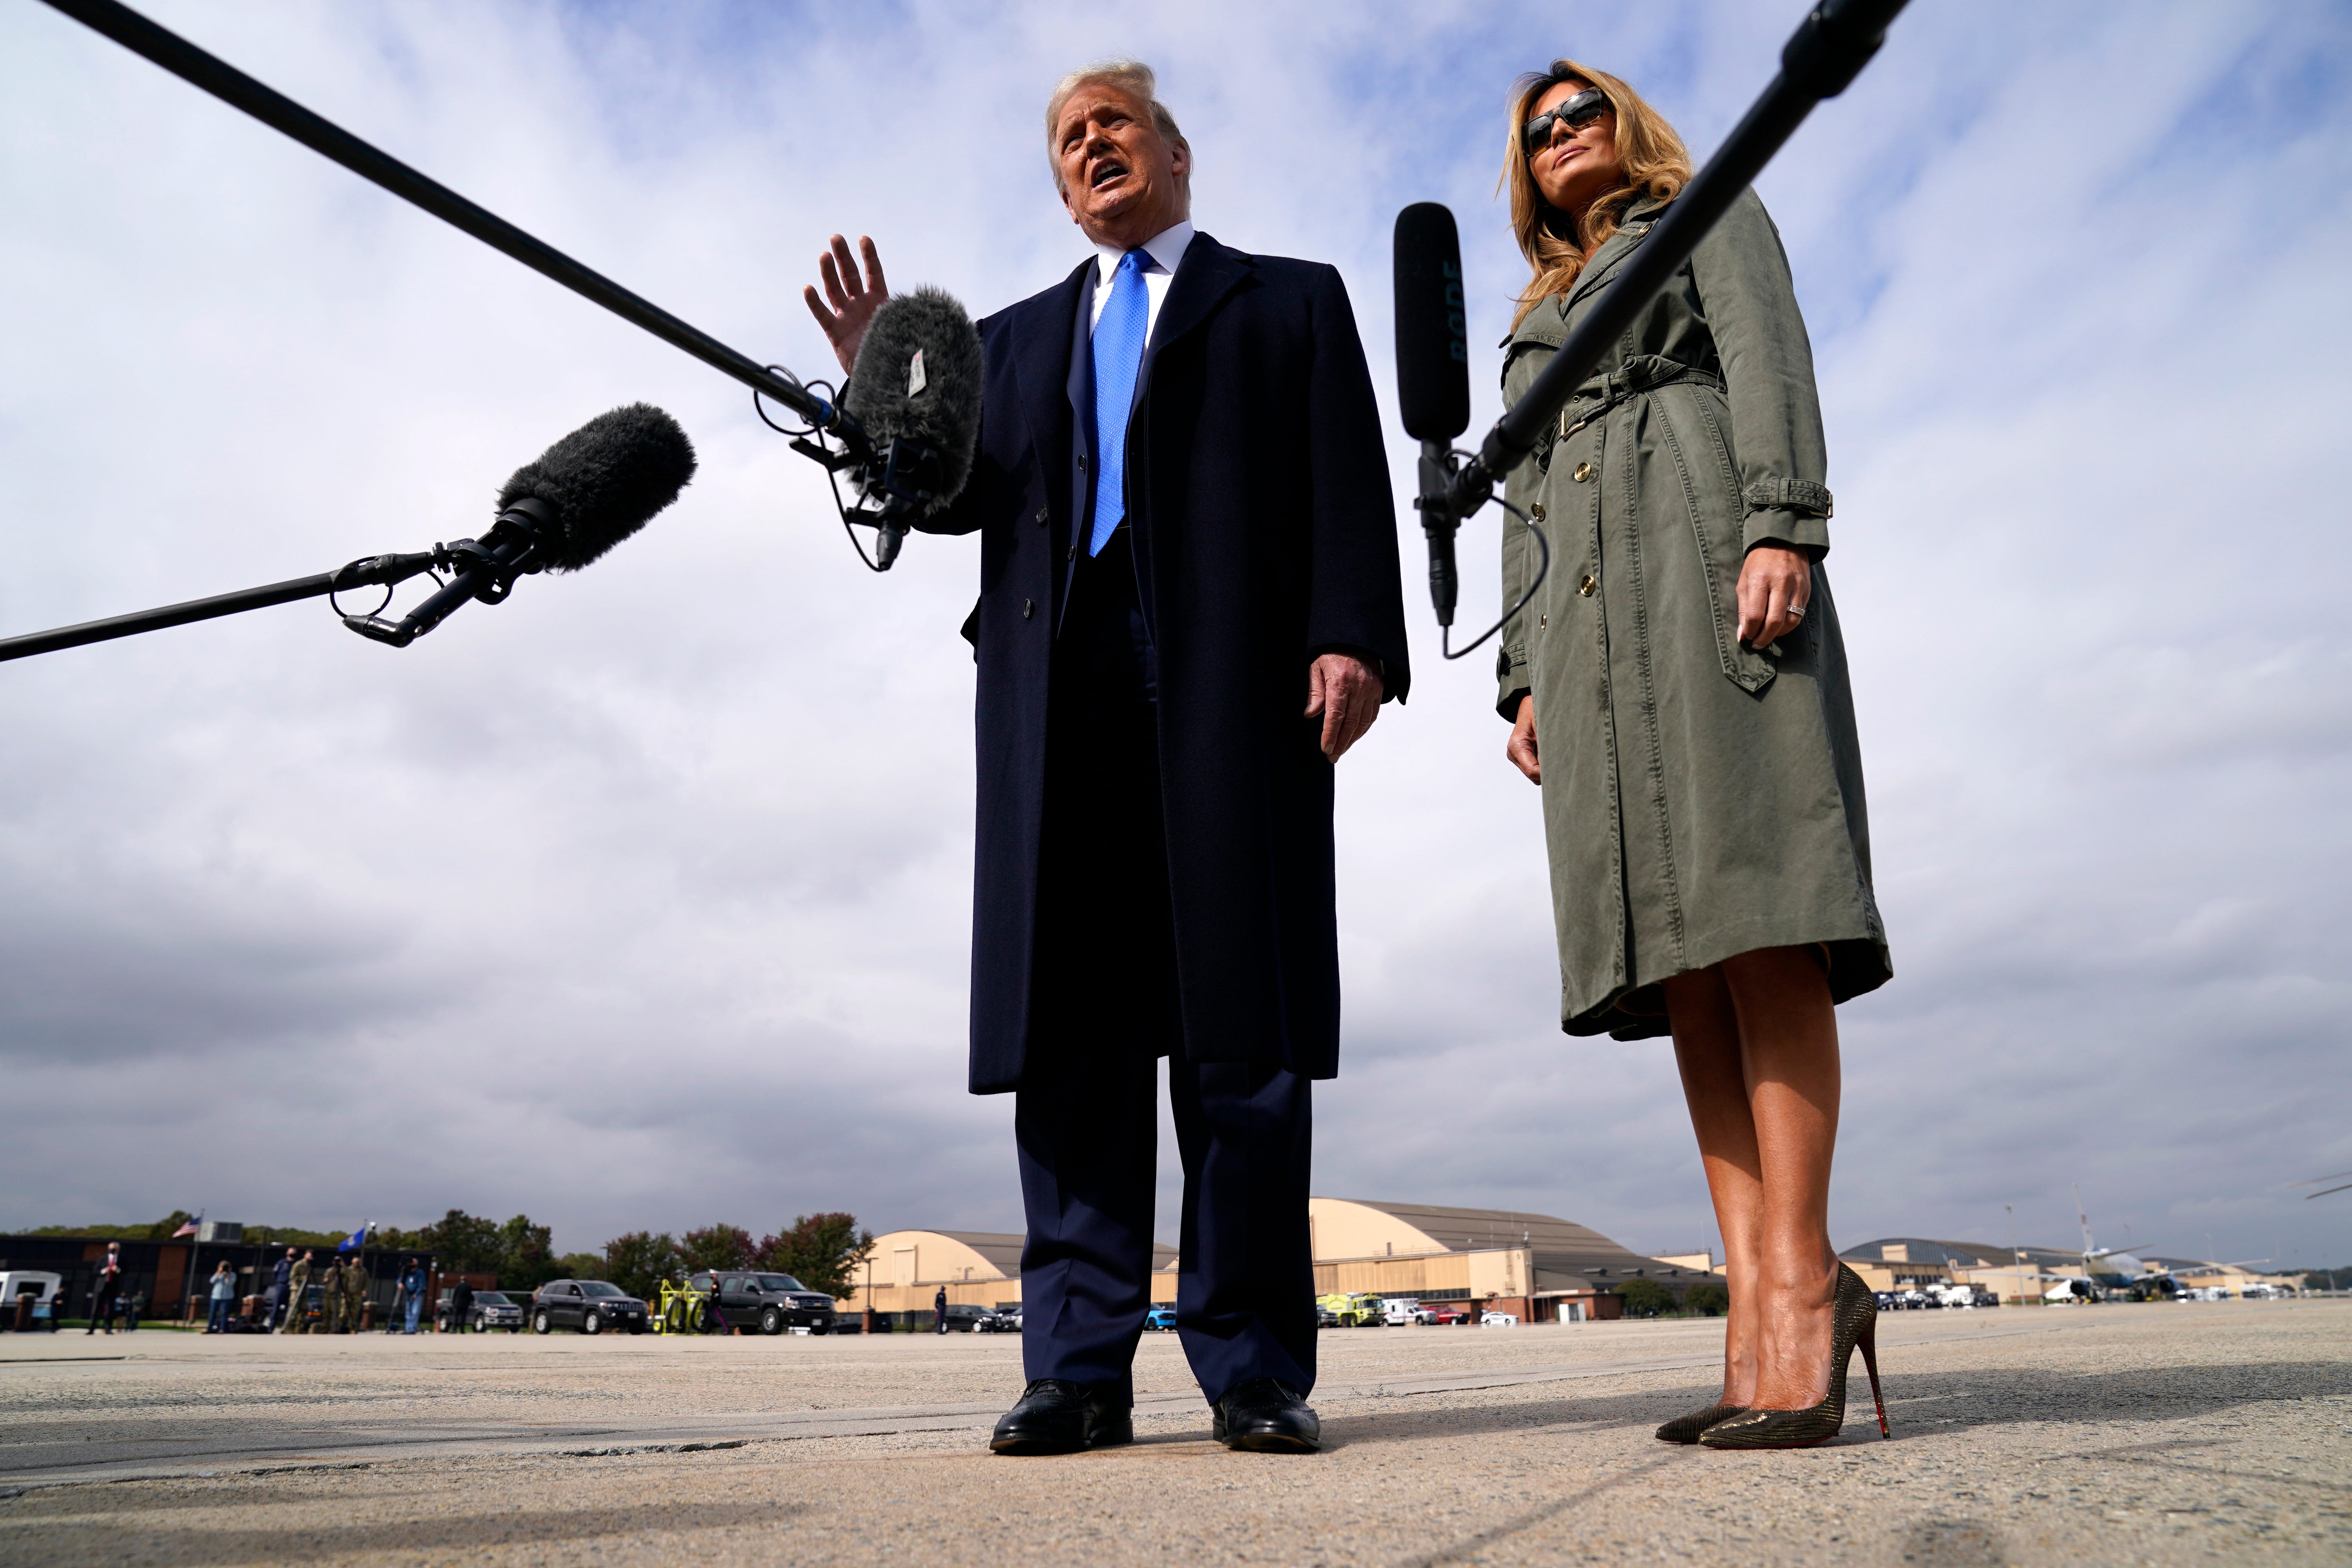 President Donald Trump talks to reporters as first lady Melania Trump listens before boarding Air Force One for a day of campaign rallies in Michigan, Wisconsin, and Nebraska, Tuesday, Oct. 27, 2020, at Andrews Air Force Base, Md. The first lady will be campaigning in Pennsylvania.